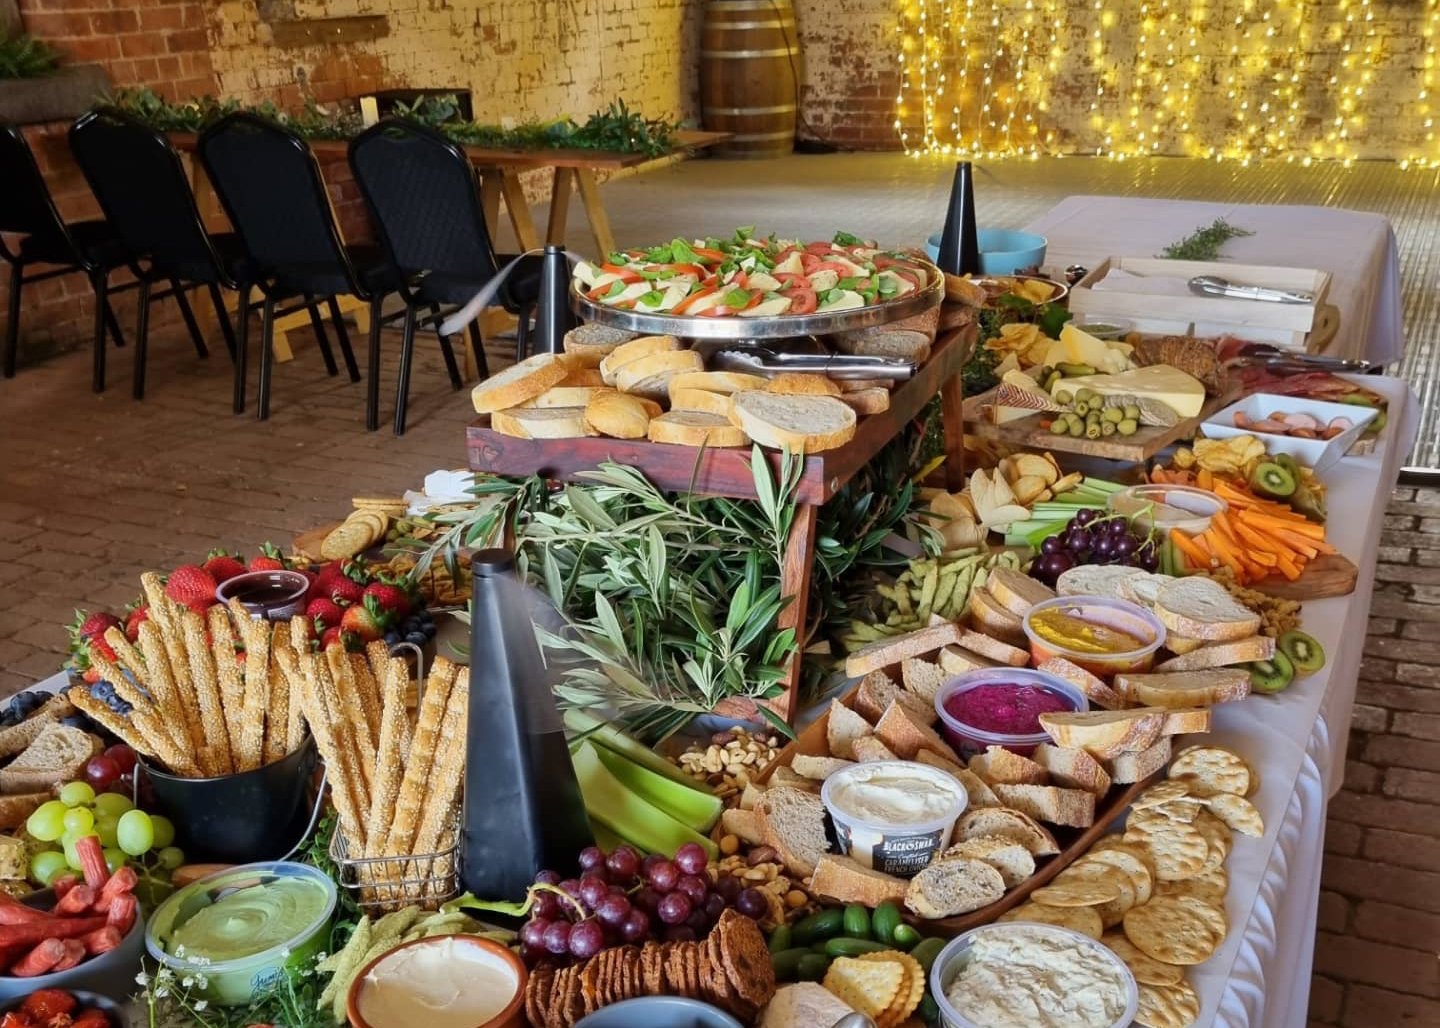 Wow your wedding guests with local catering — Fed by Jed Event Catering